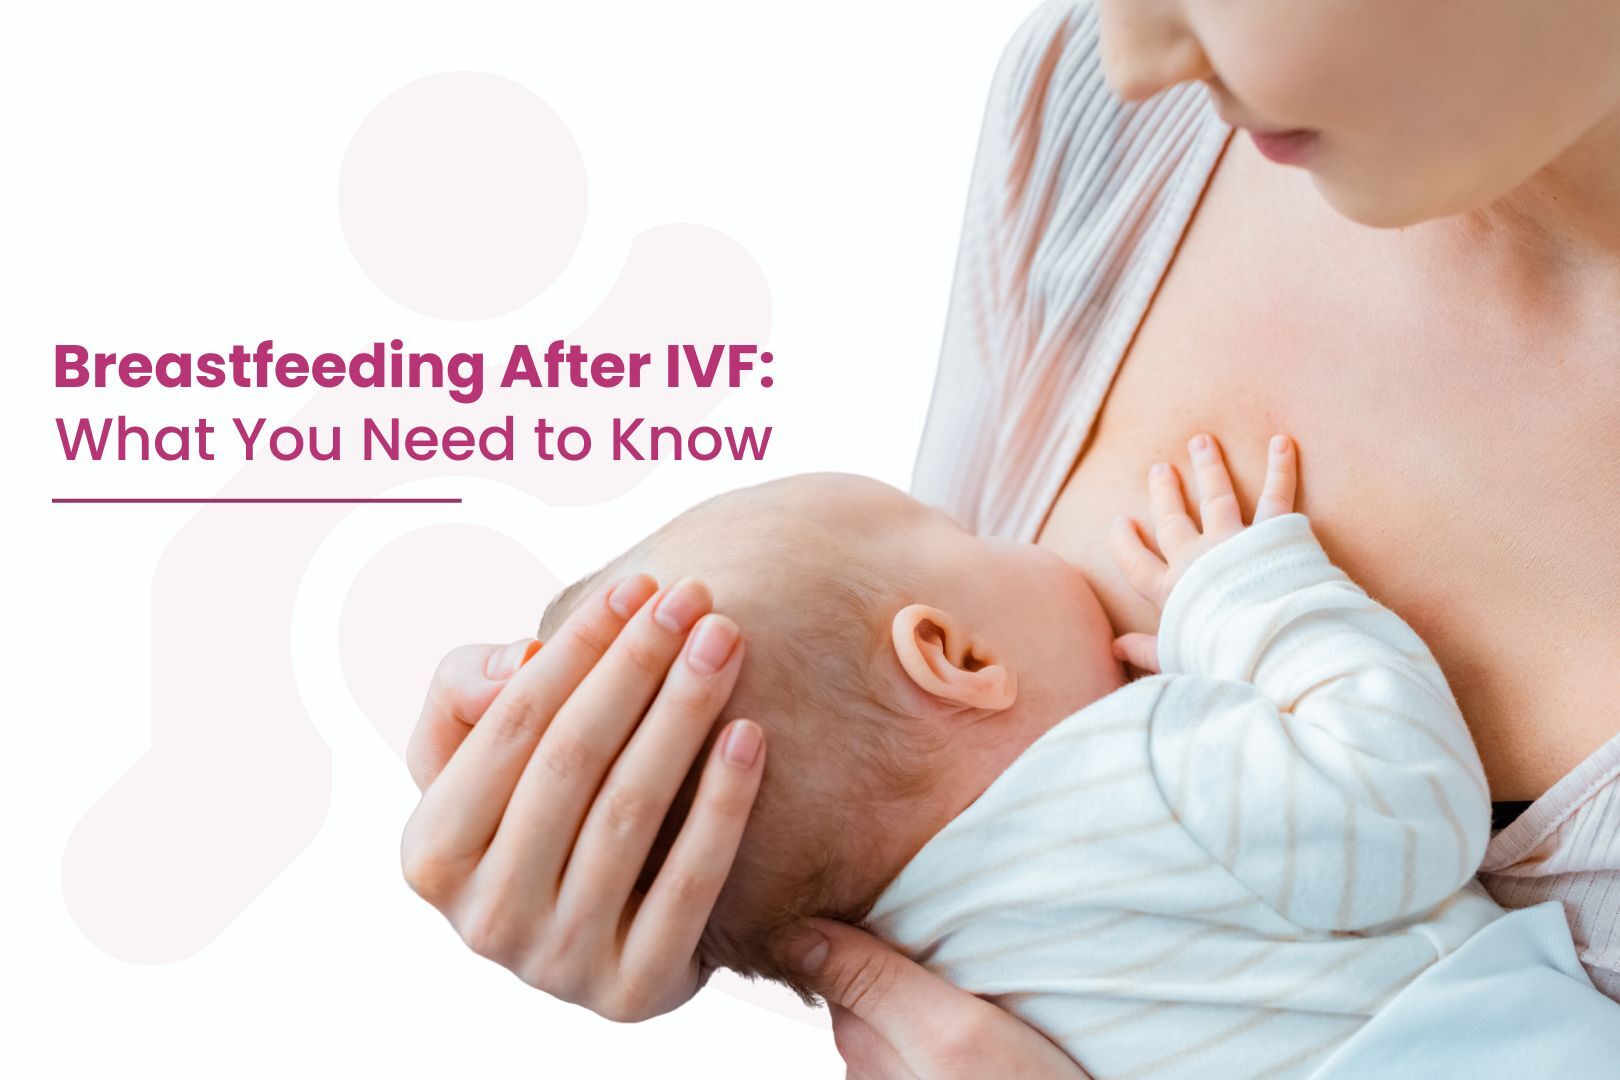 Breastfeeding After IVF: What You Need to Know